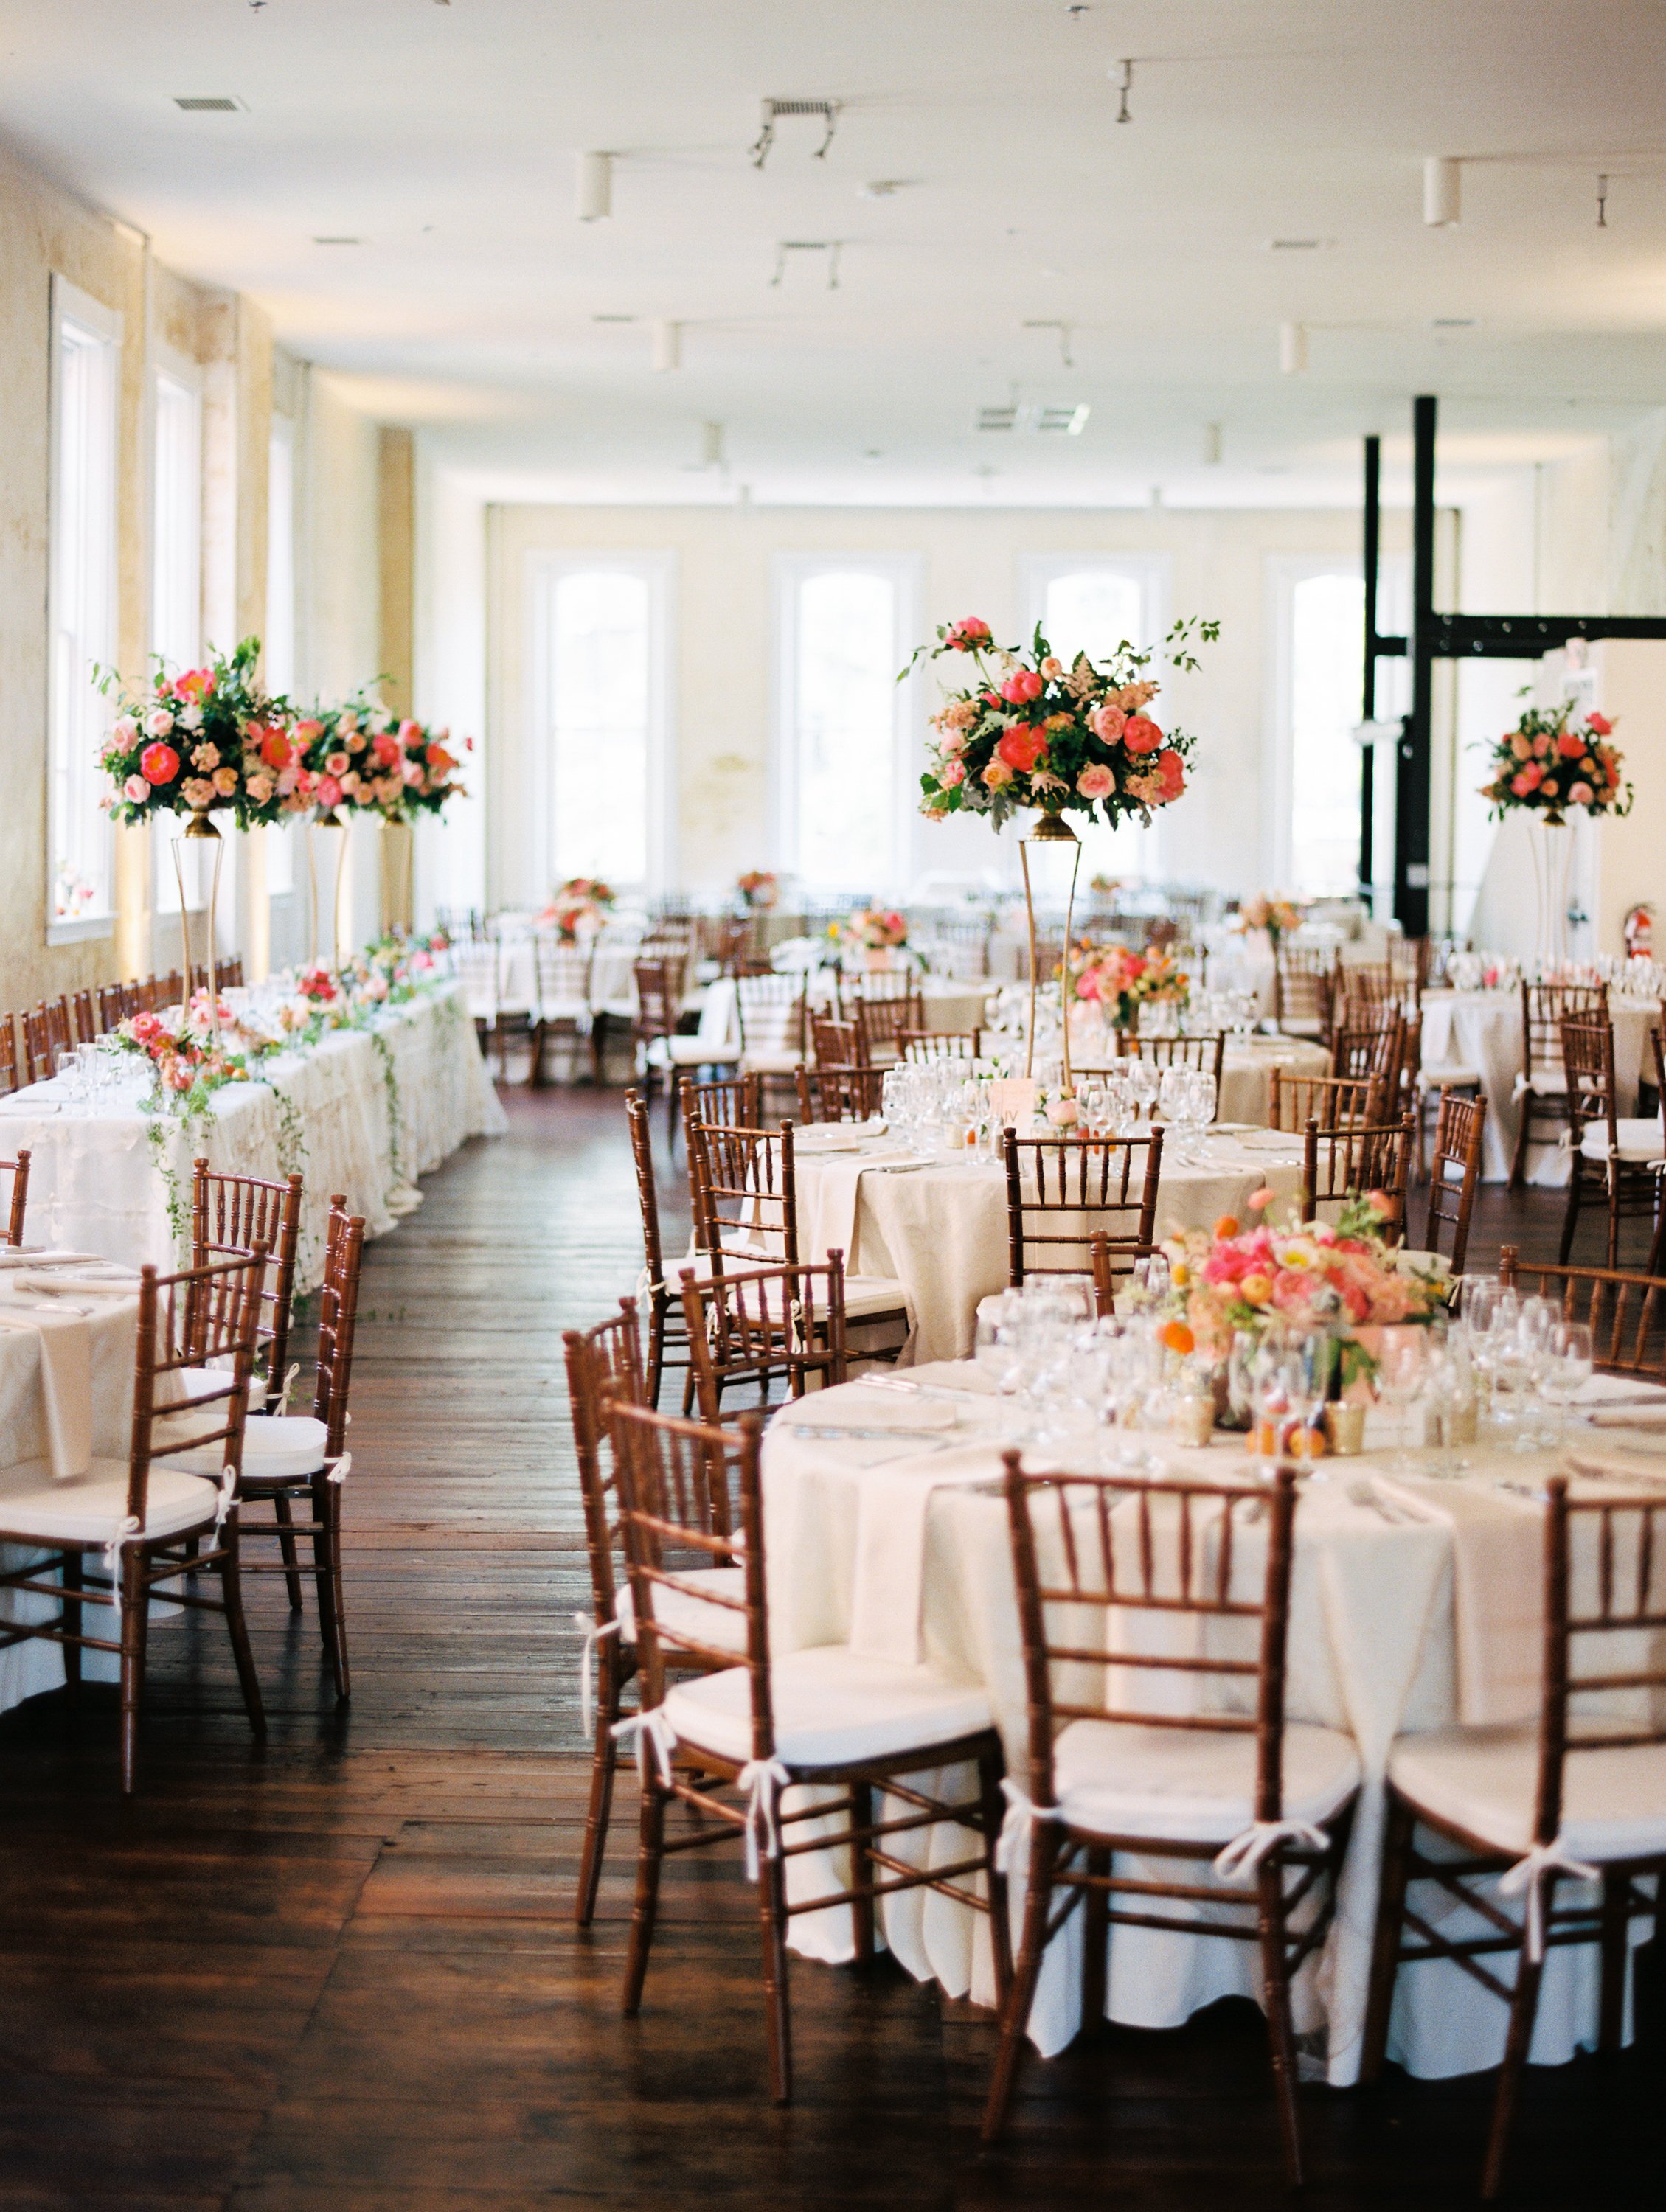 Eclectic and sophisticated wedding reception set up with brown wood chairs and beige linens